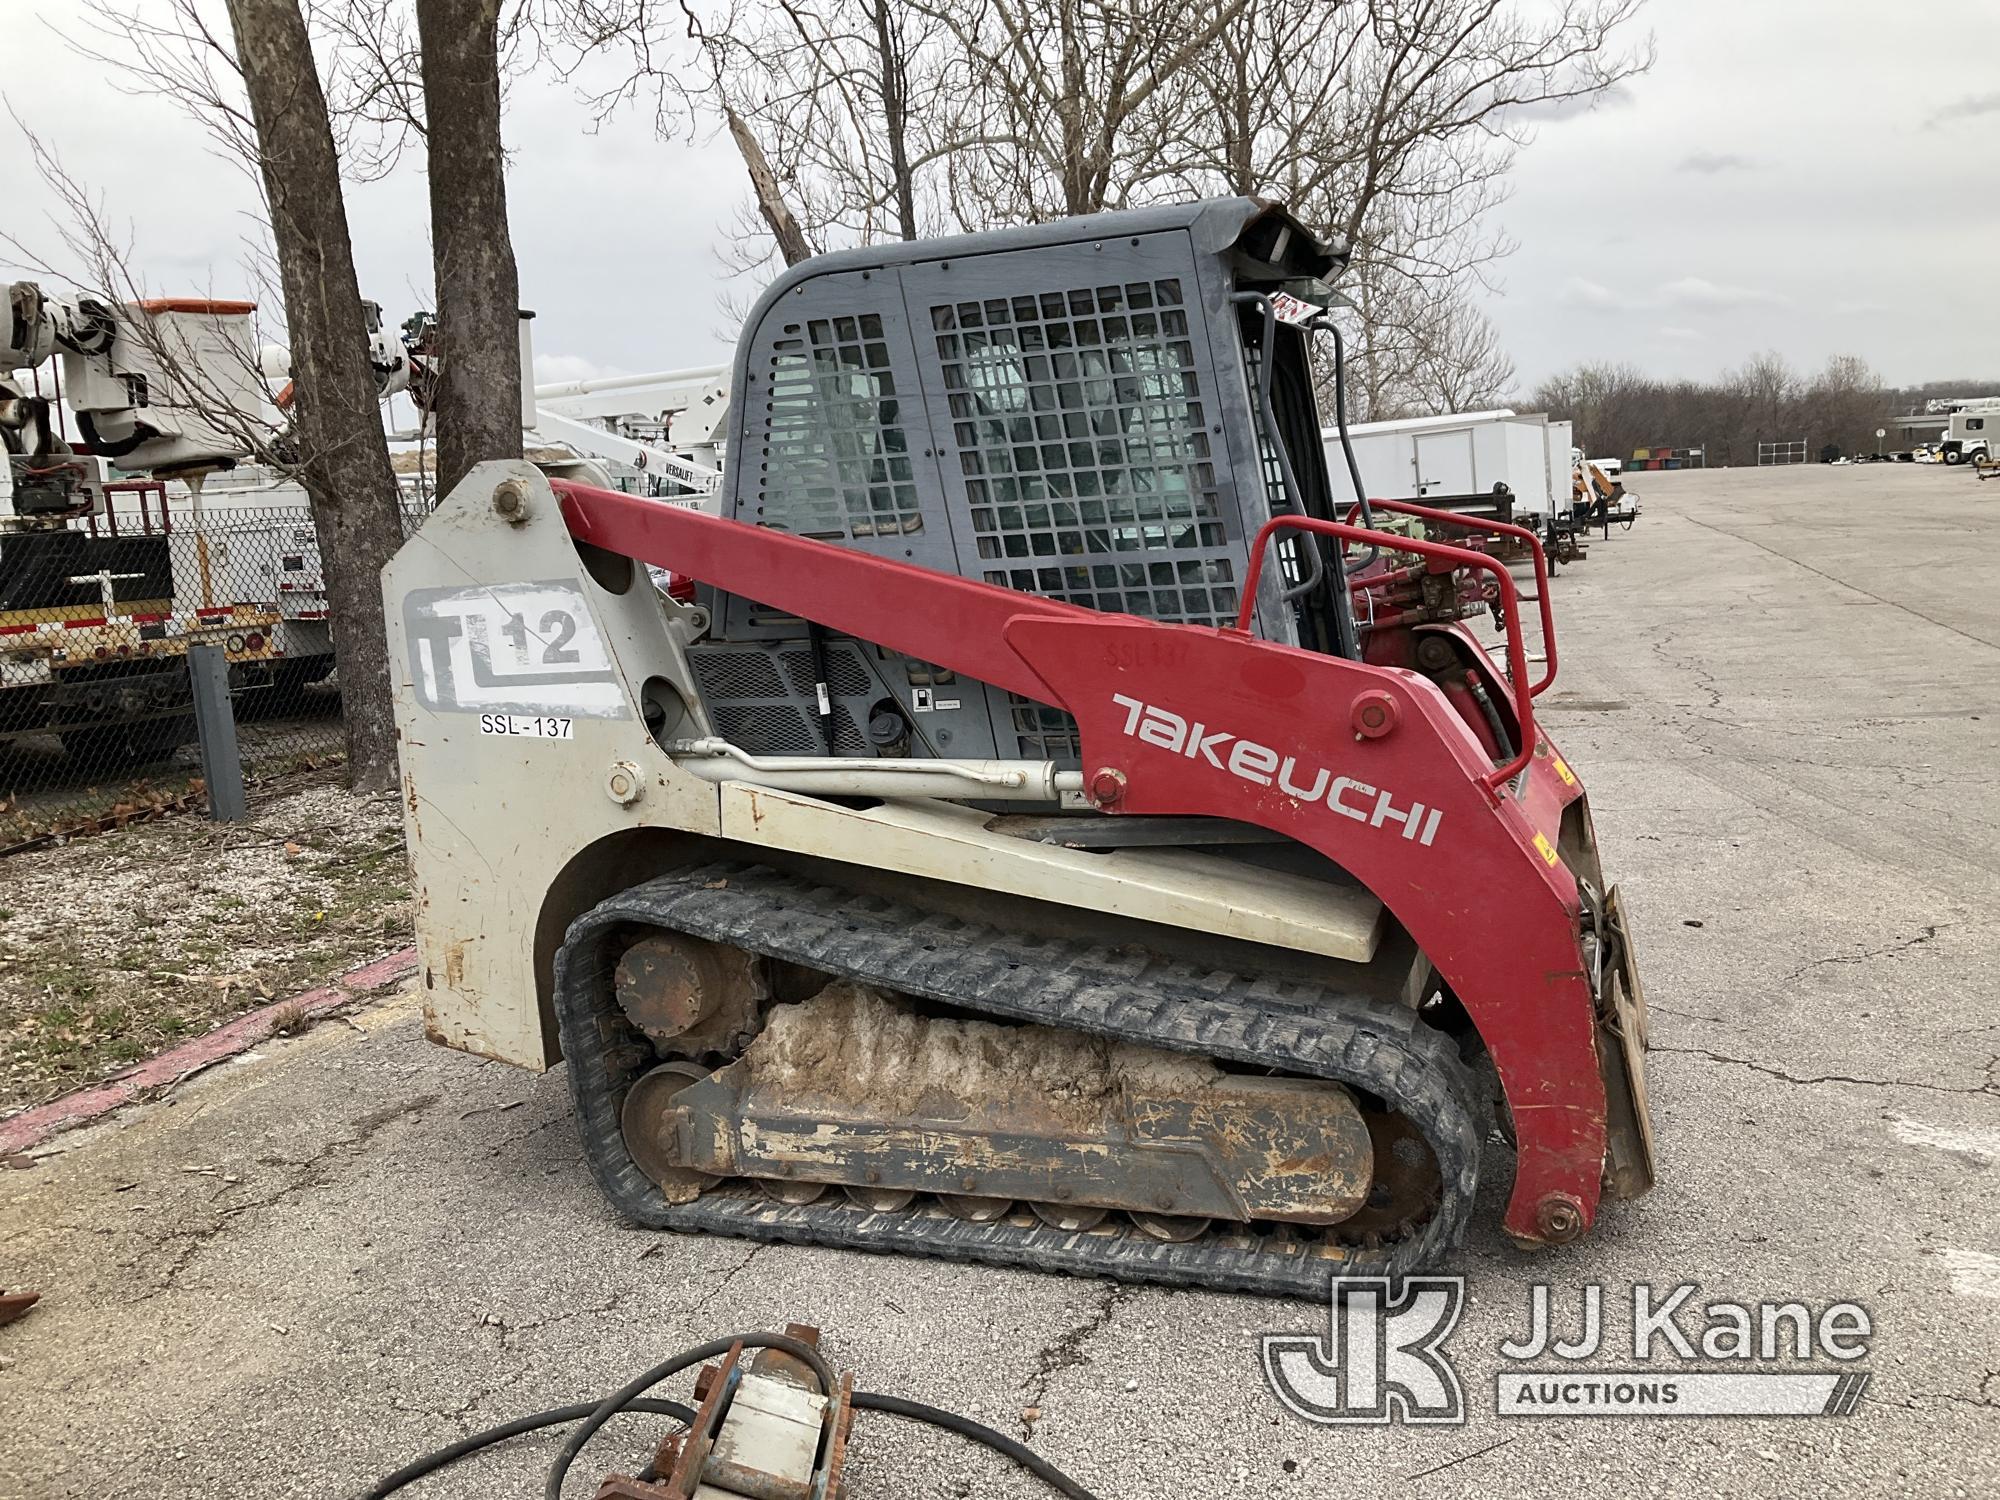 (Kansas City, MO) 2013 Takeuchi TL12 Skid Steer Loader Not Running, Condition Unknown, Has Power